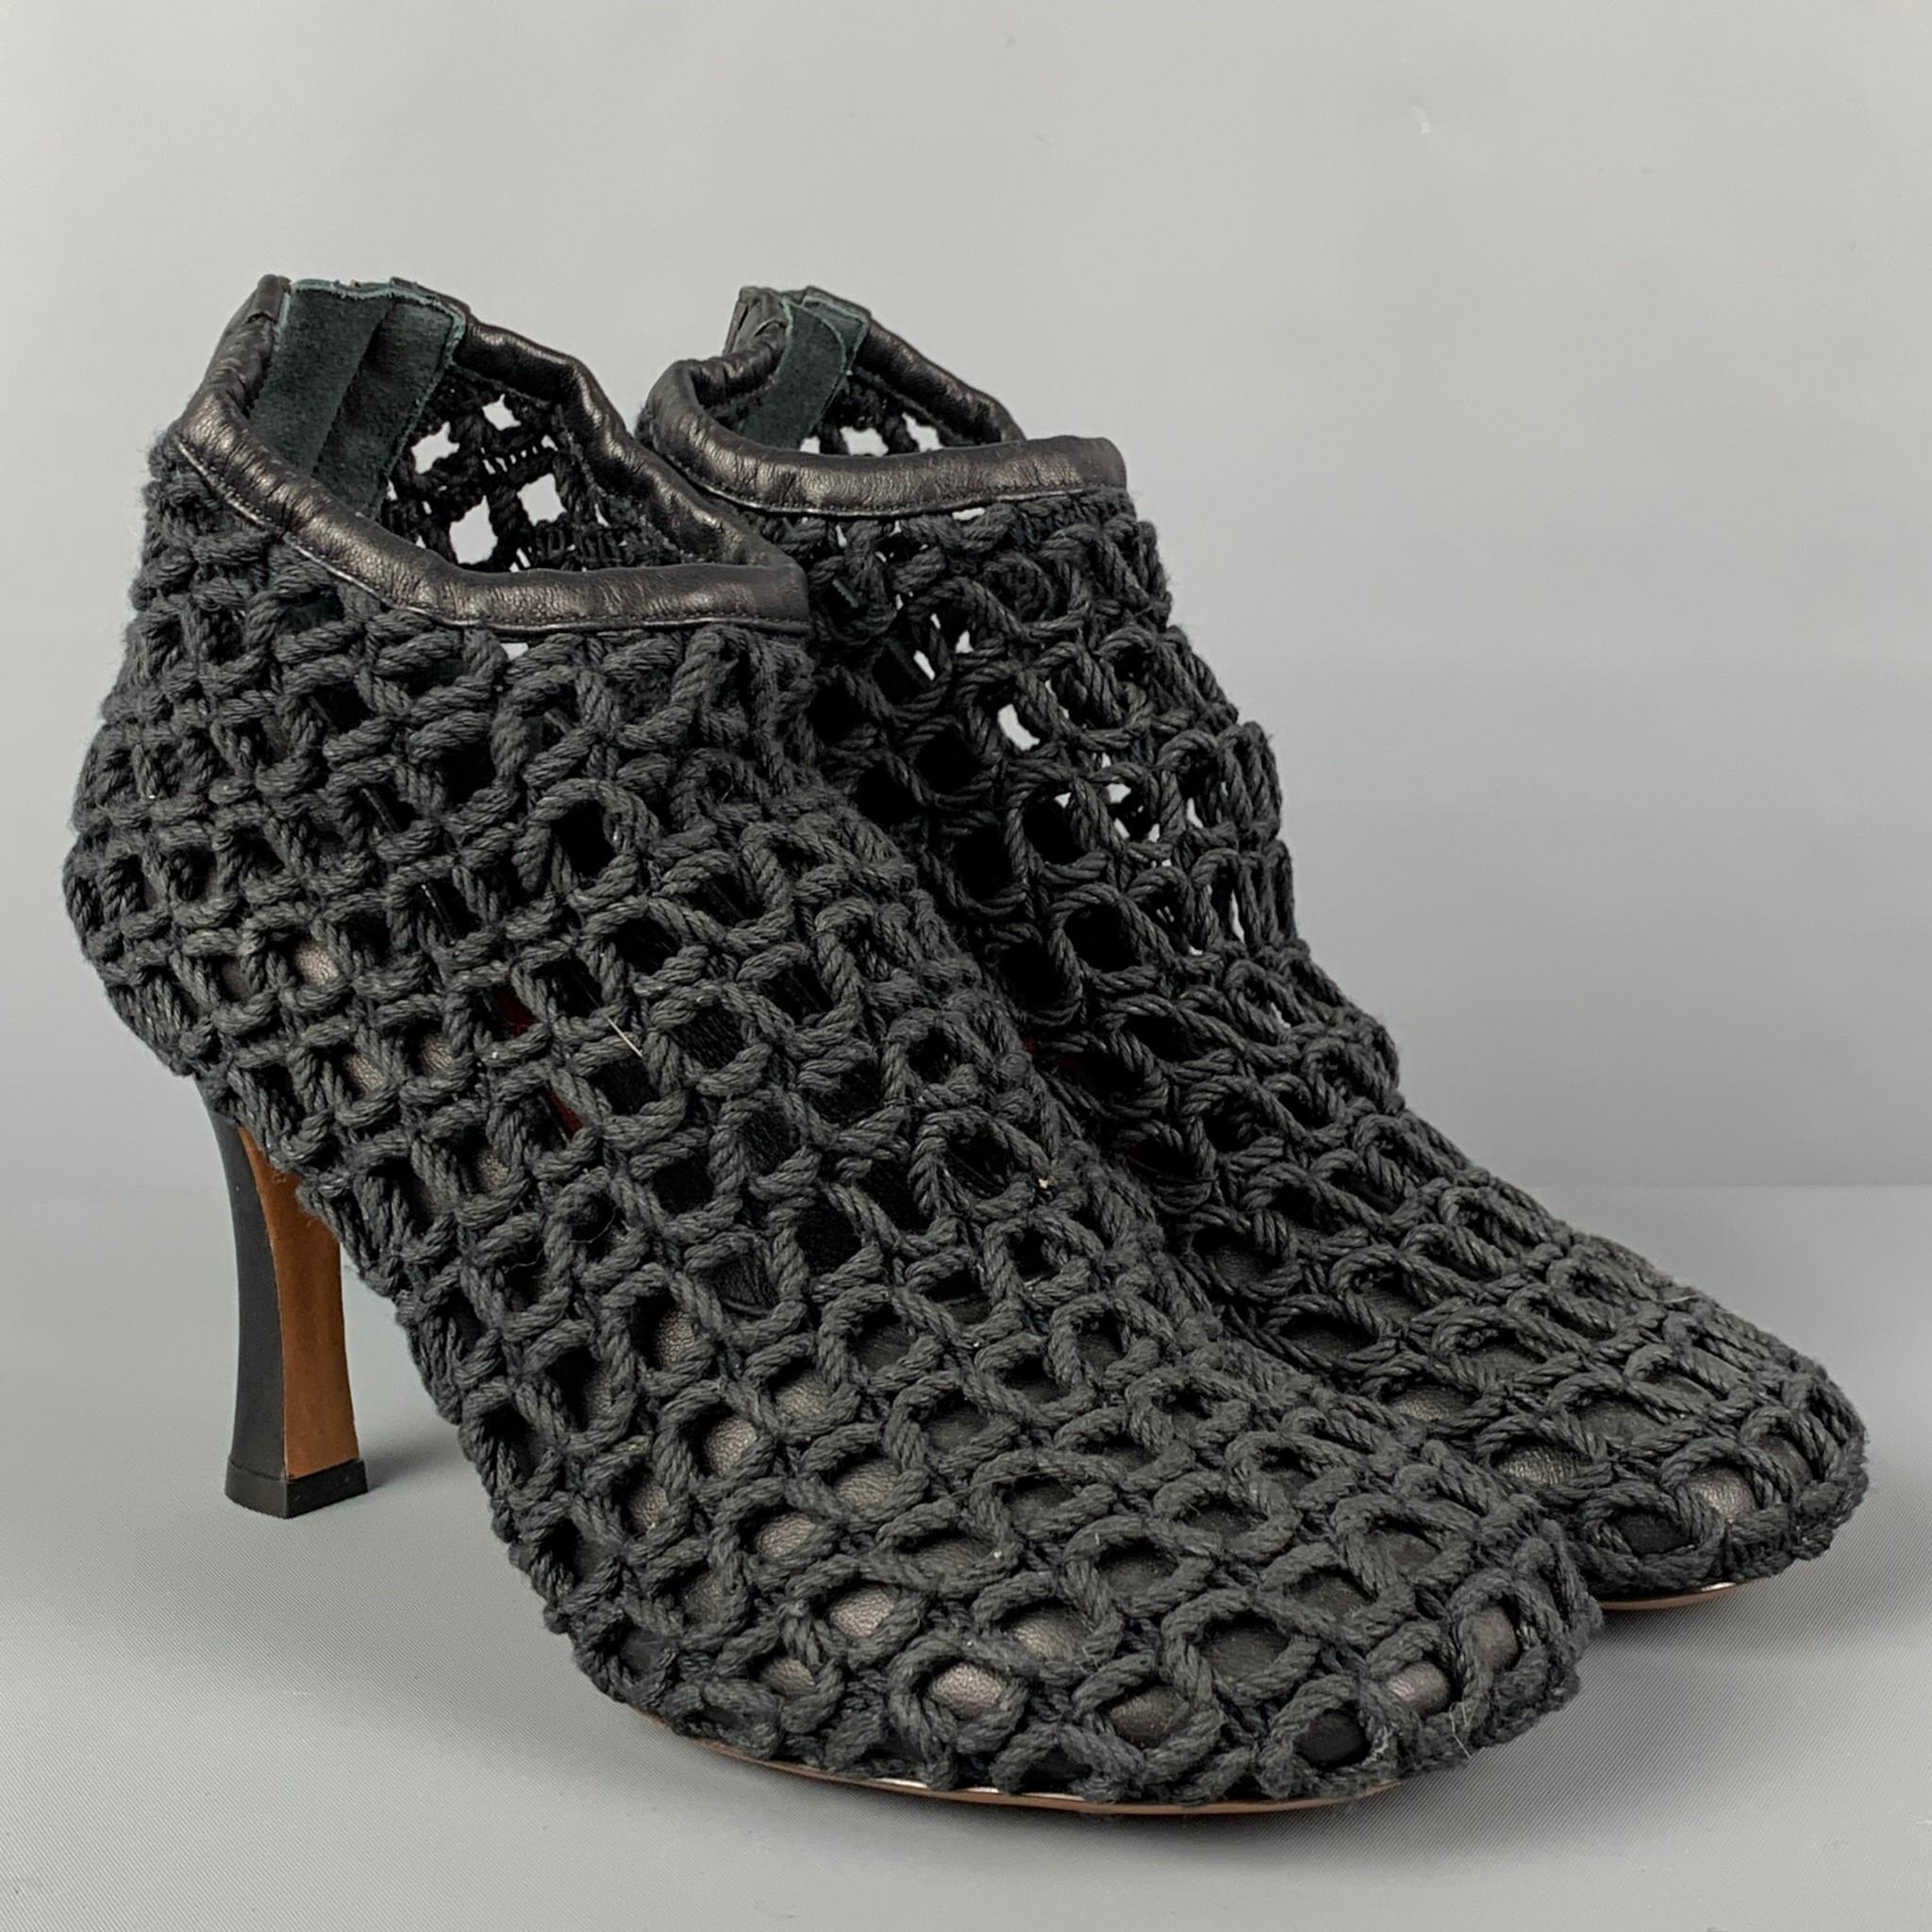 CELINE heels comes in a black woven rope design featuring a leather panel, square toe, back zipper, and a stacked heel. Made in Italy.

Very Good Pre-Owned Condition.
Marked: 37.5
Original Retail Price: $1,100.00

Measurements:

Heel: 3.5 in. 